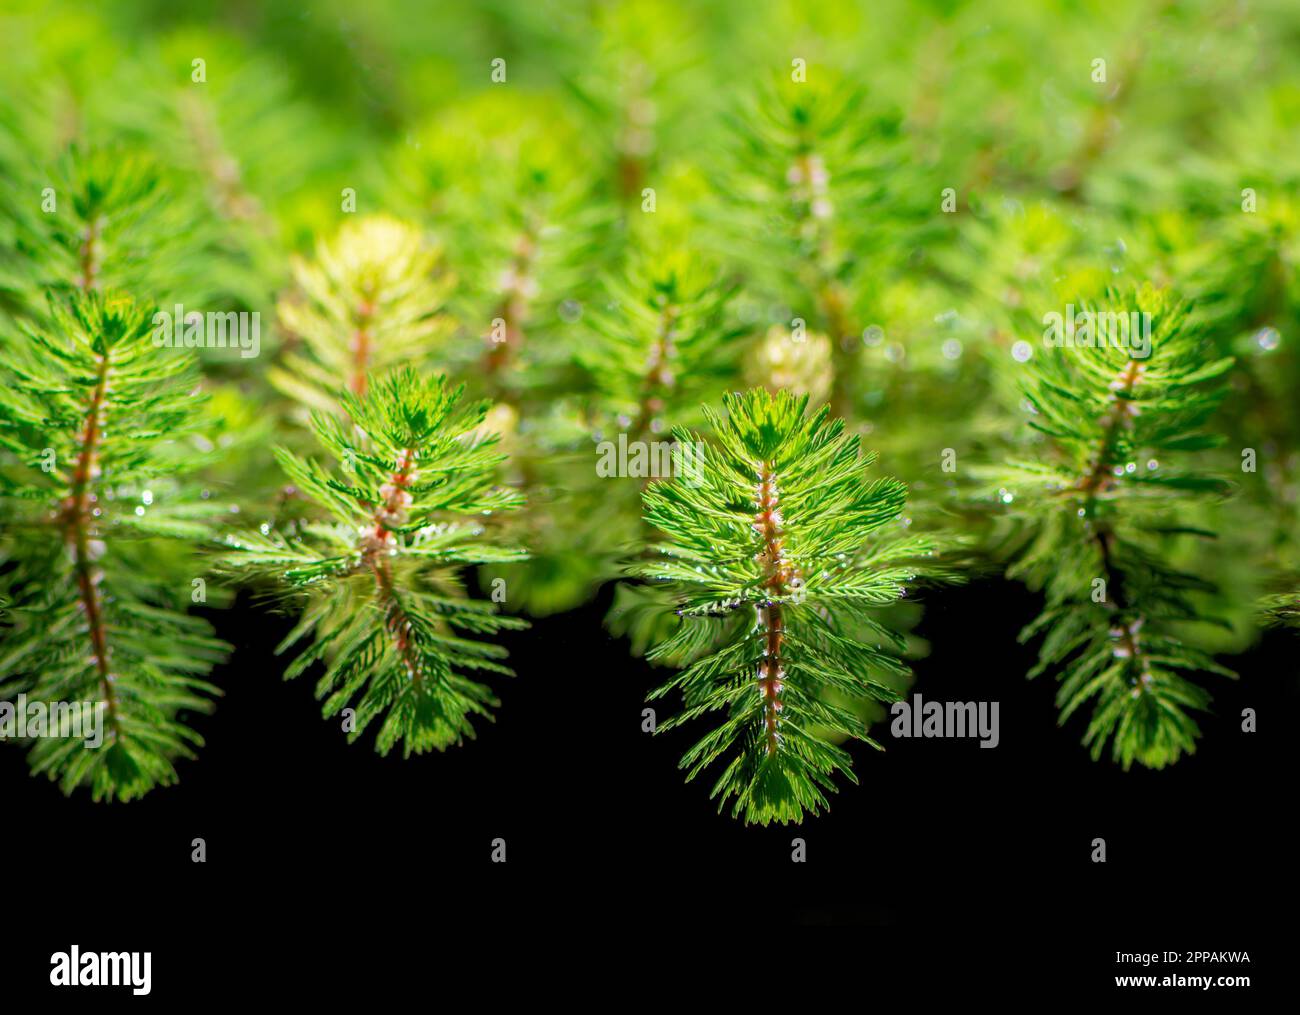 A lot of watermilfoil plants in a pond Stock Photo